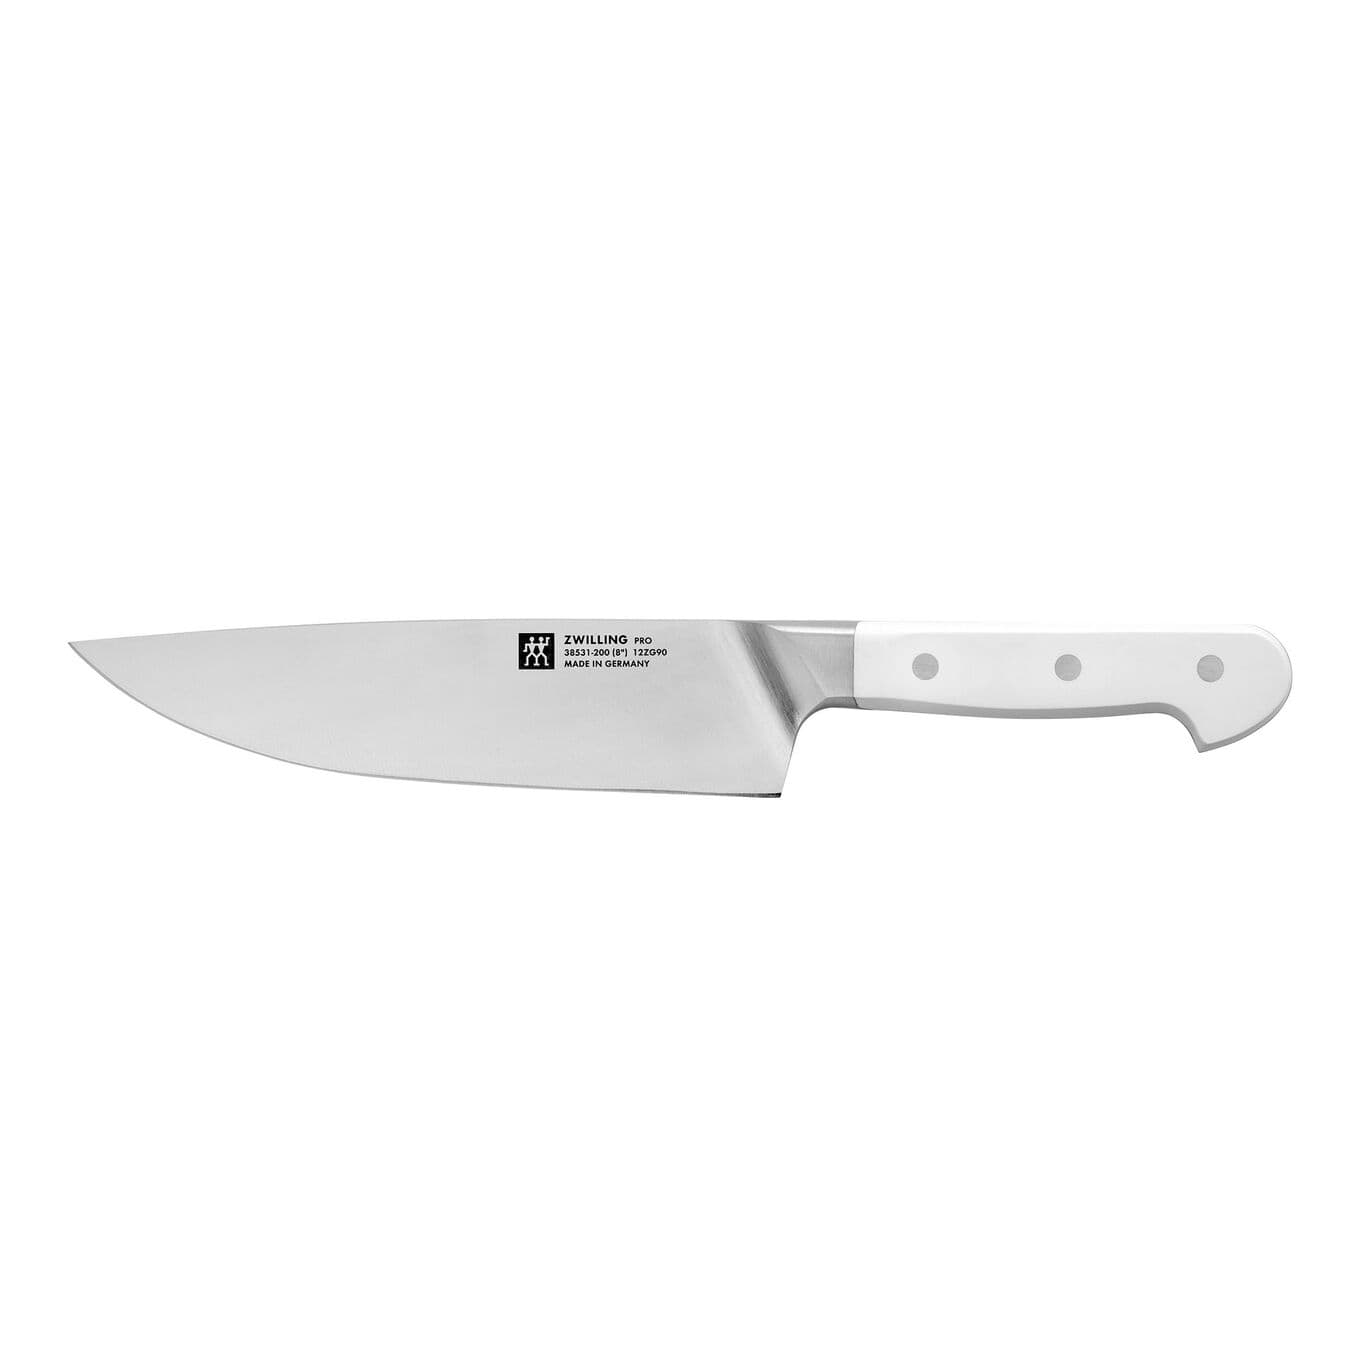 https://cdn.apartmenttherapy.info/image/upload/v1633455061/gen-workflow/product-database/Zwilling_Pro_Le_Blanc_8-inch_Chef_s_Knife.jpg